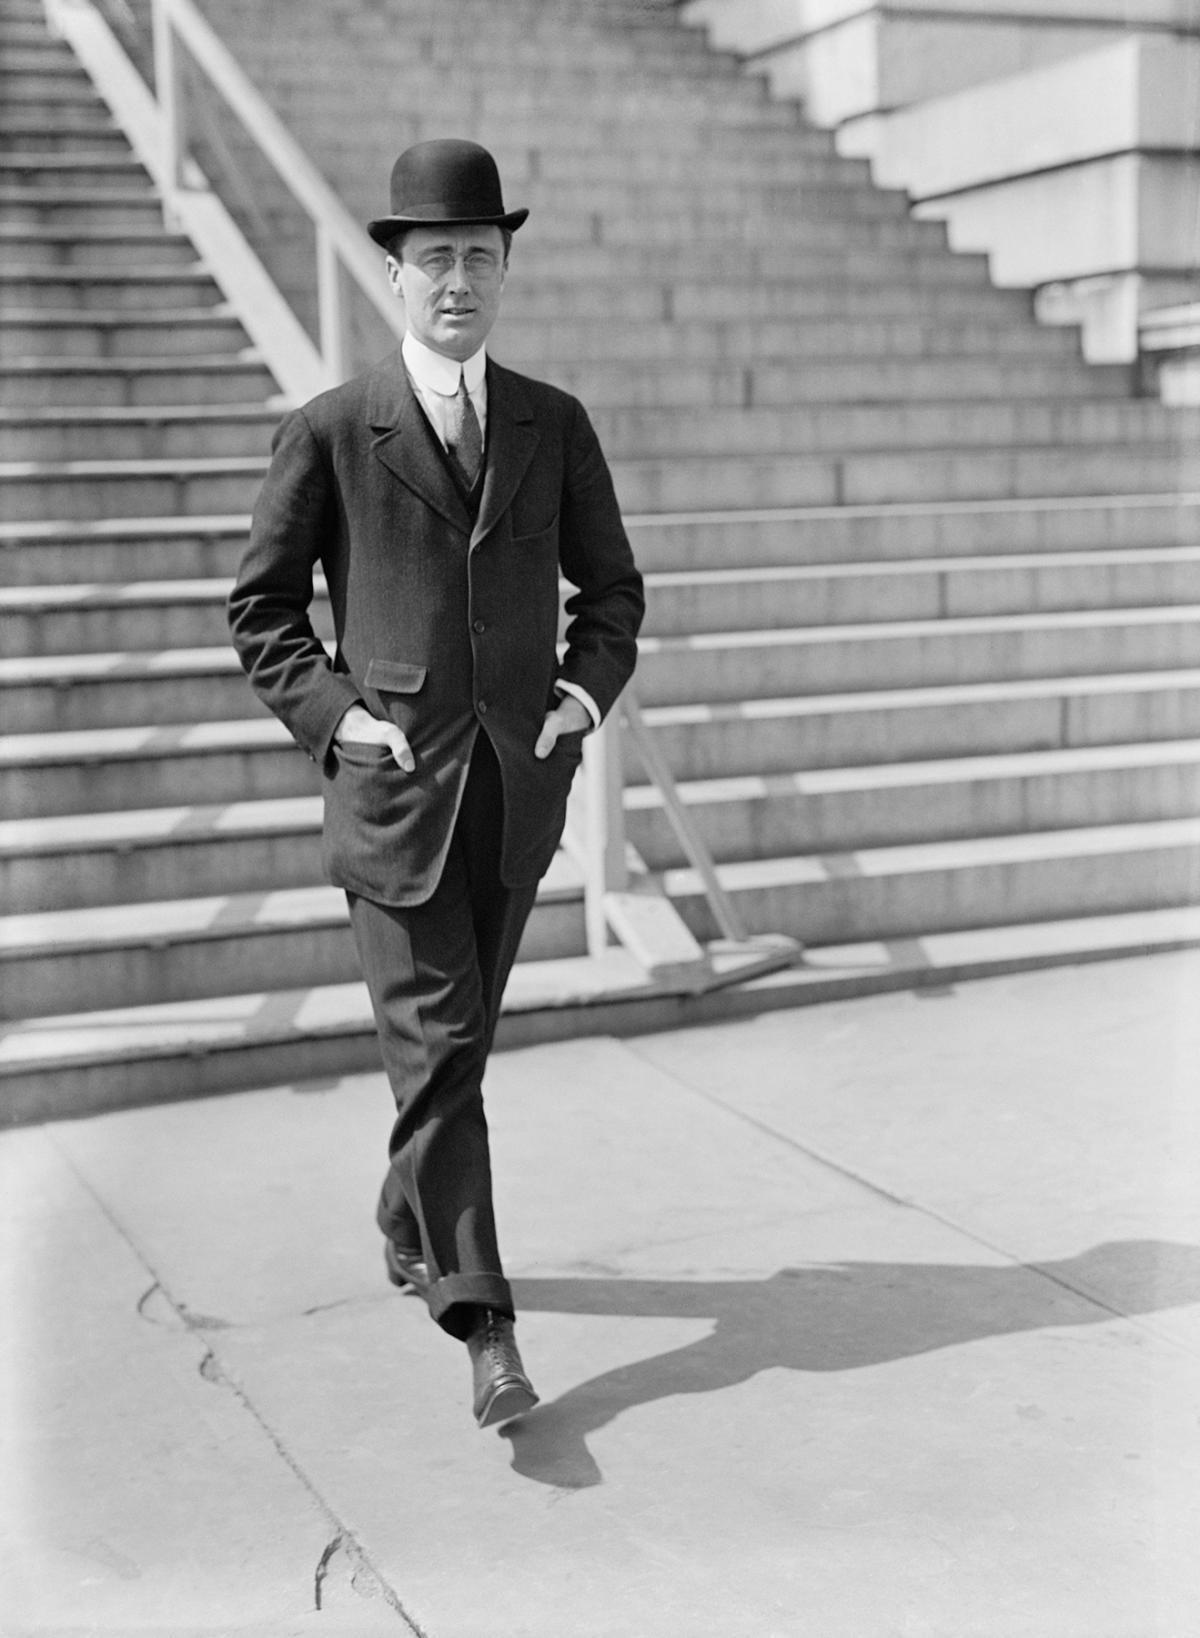 Young FDR in a bowler hat and dark suit